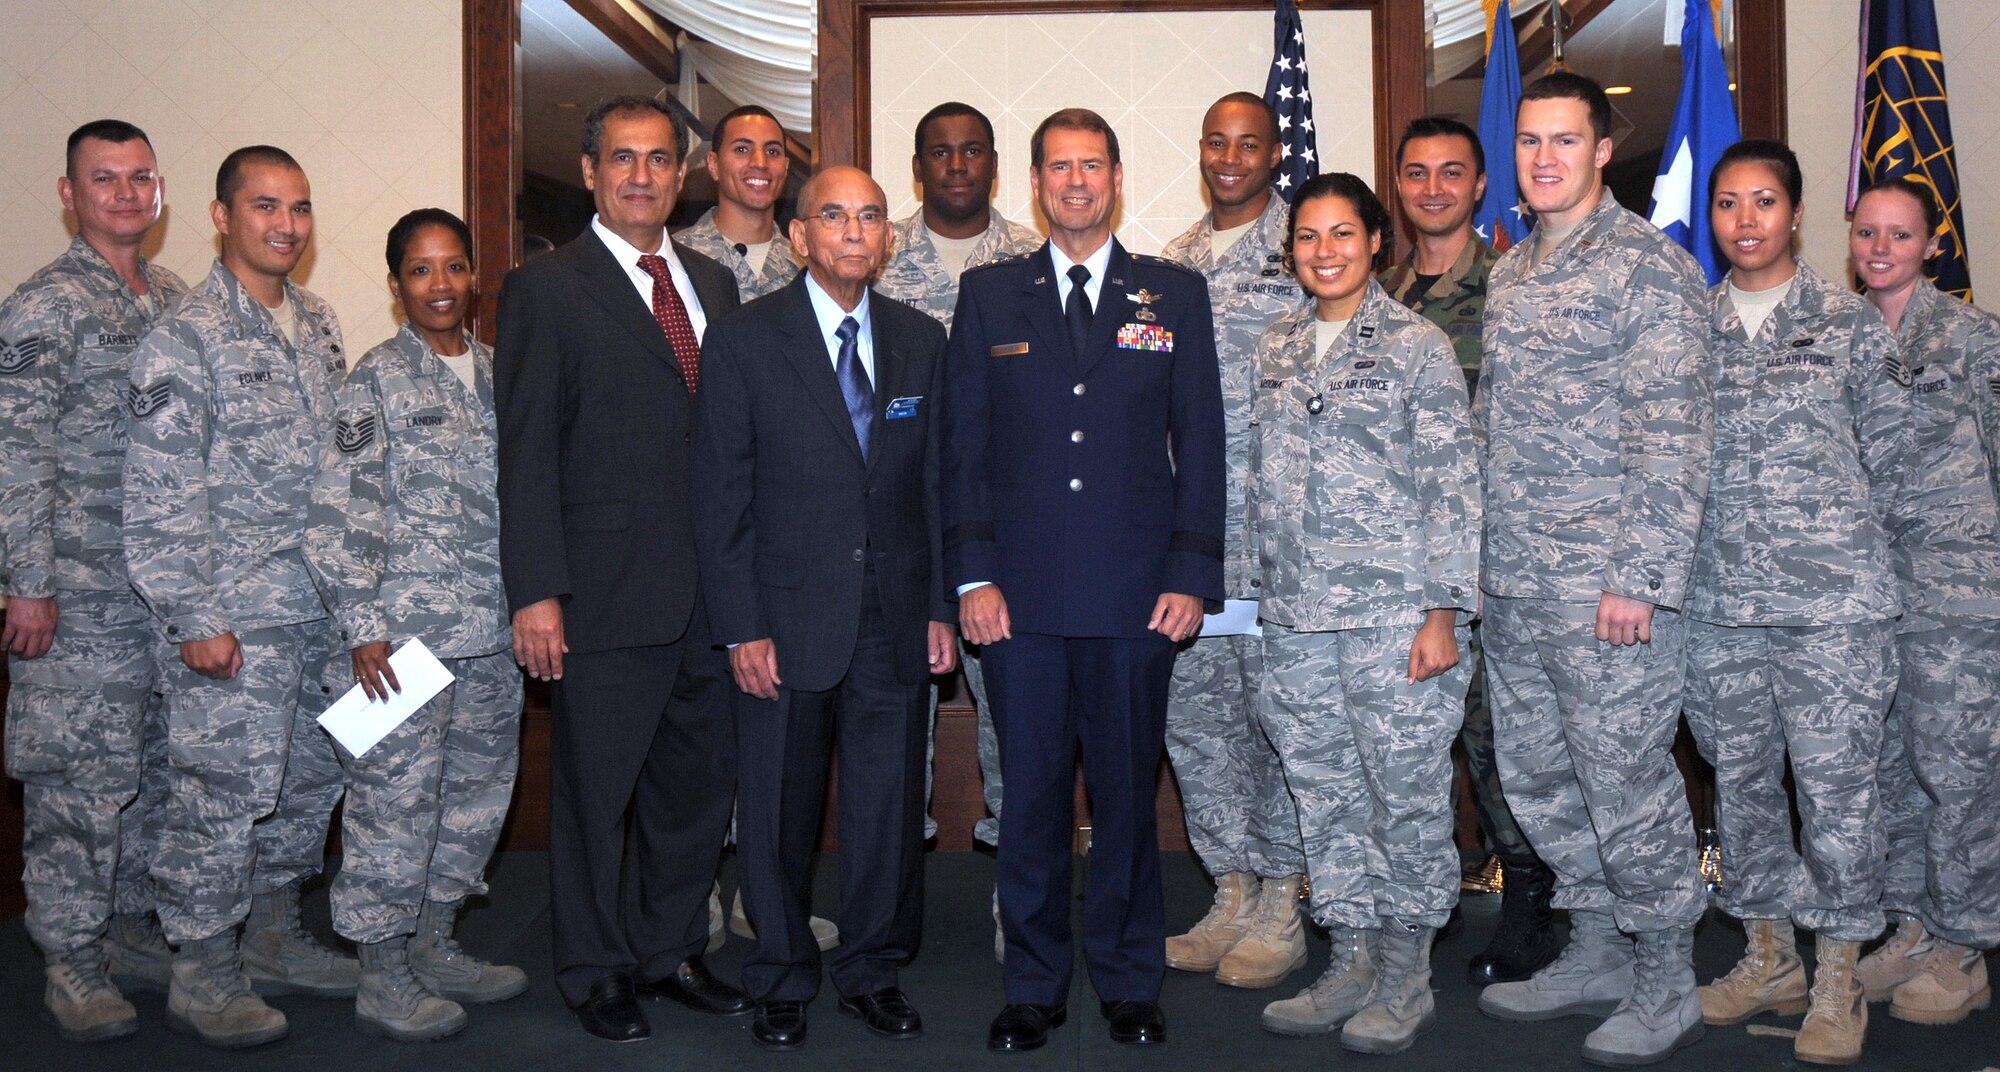 Award recipients gather around Lt. Gen. Tom Sheridan (center), Space and Missile Systems Center commander, and officials from the Armed Forces Communications and Electronics Association during the AFCEA award luncheon last month. General Sheridan was the keynote speaker for the event, which AFCEA’s Los Angeles Chapter presented scholarships and monetary awards to military recipients in the local area. (Photo by Atiba Copeland)